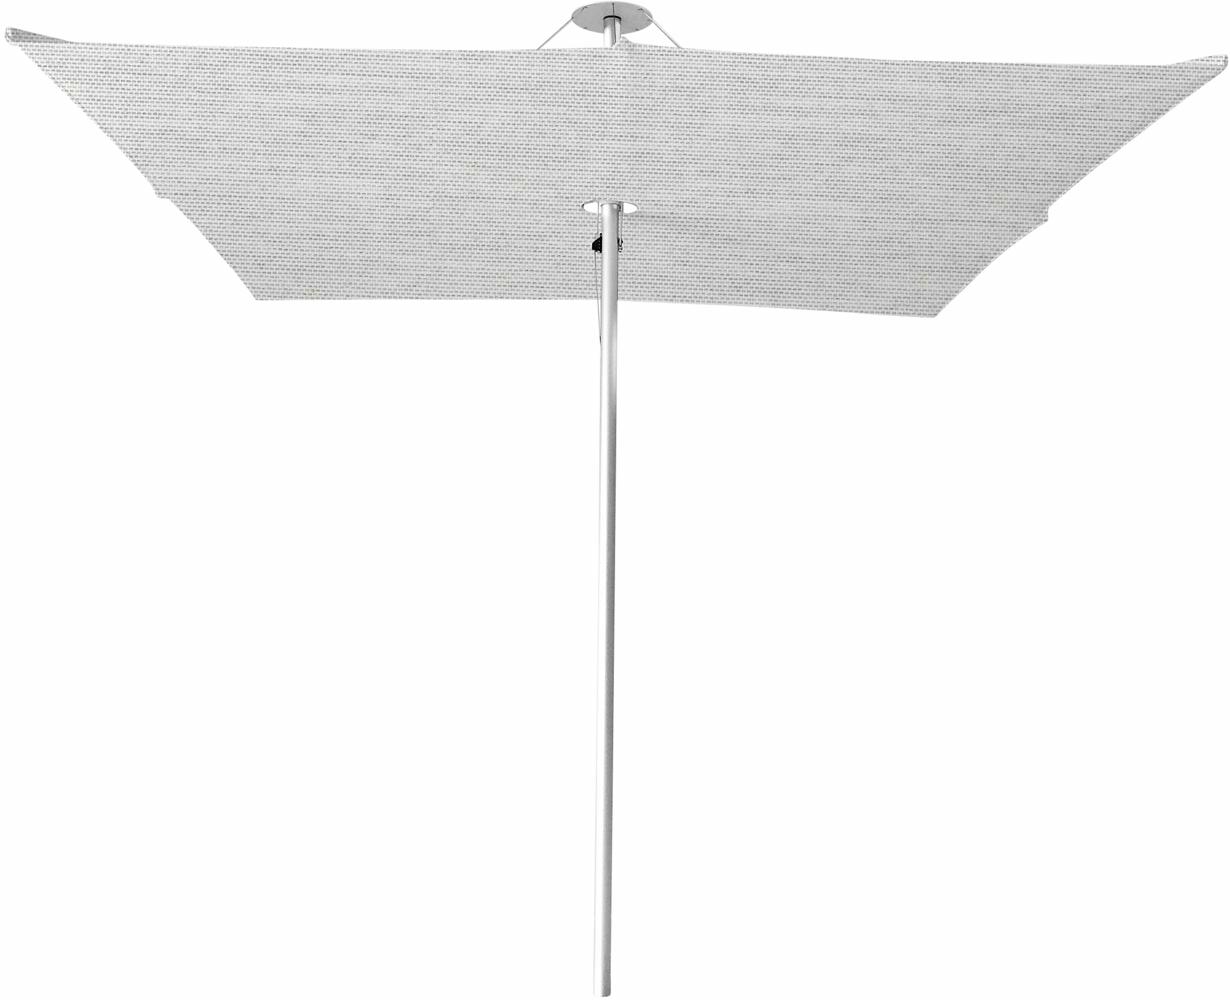 Infina center post umbrella, 3 m square, with frame in Aluminum and Solidum Marble canopy. 